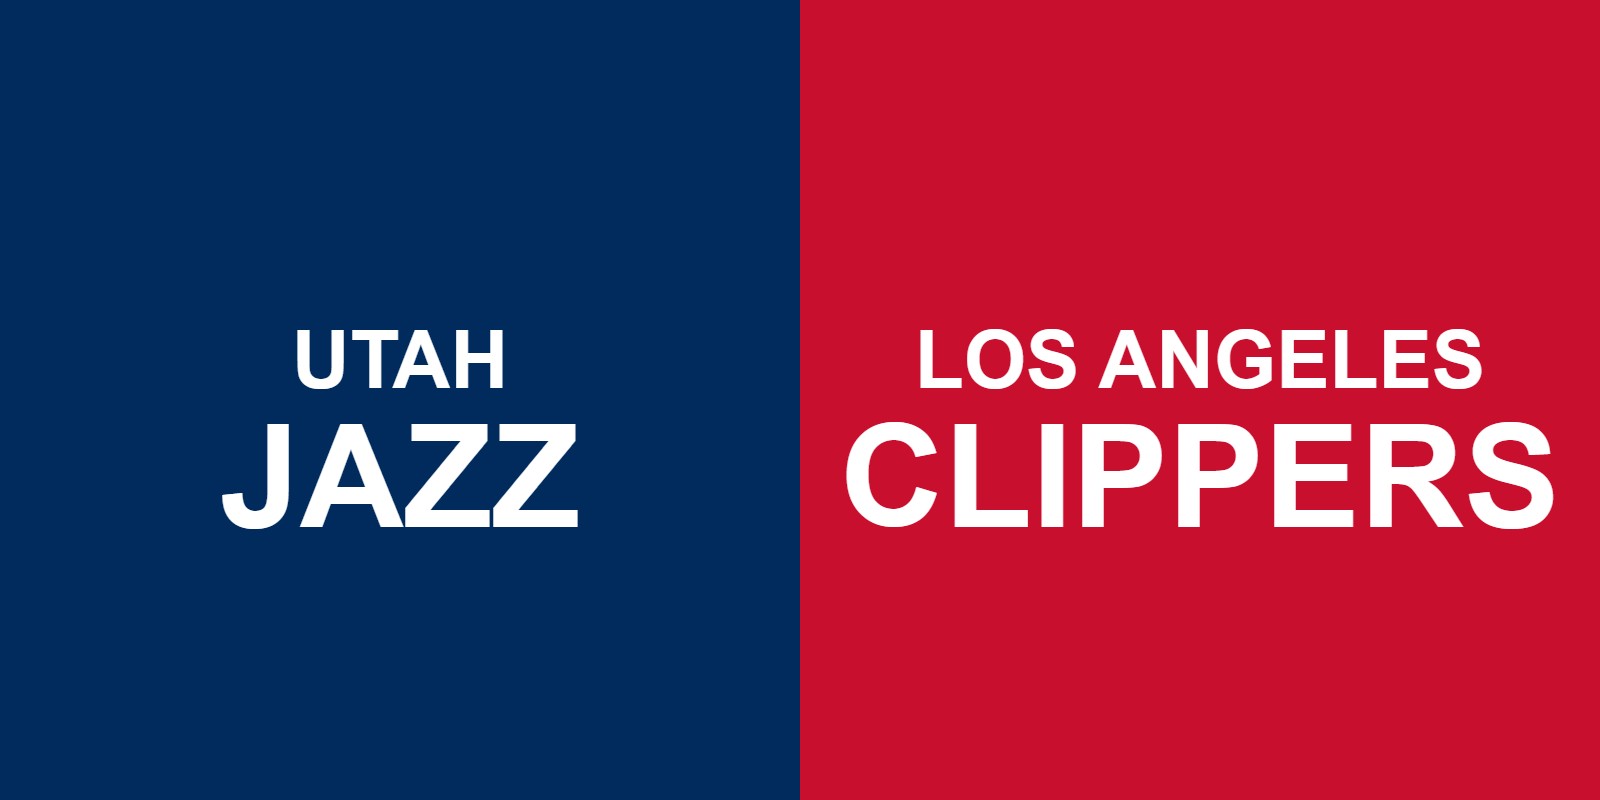 Jazz vs Clippers